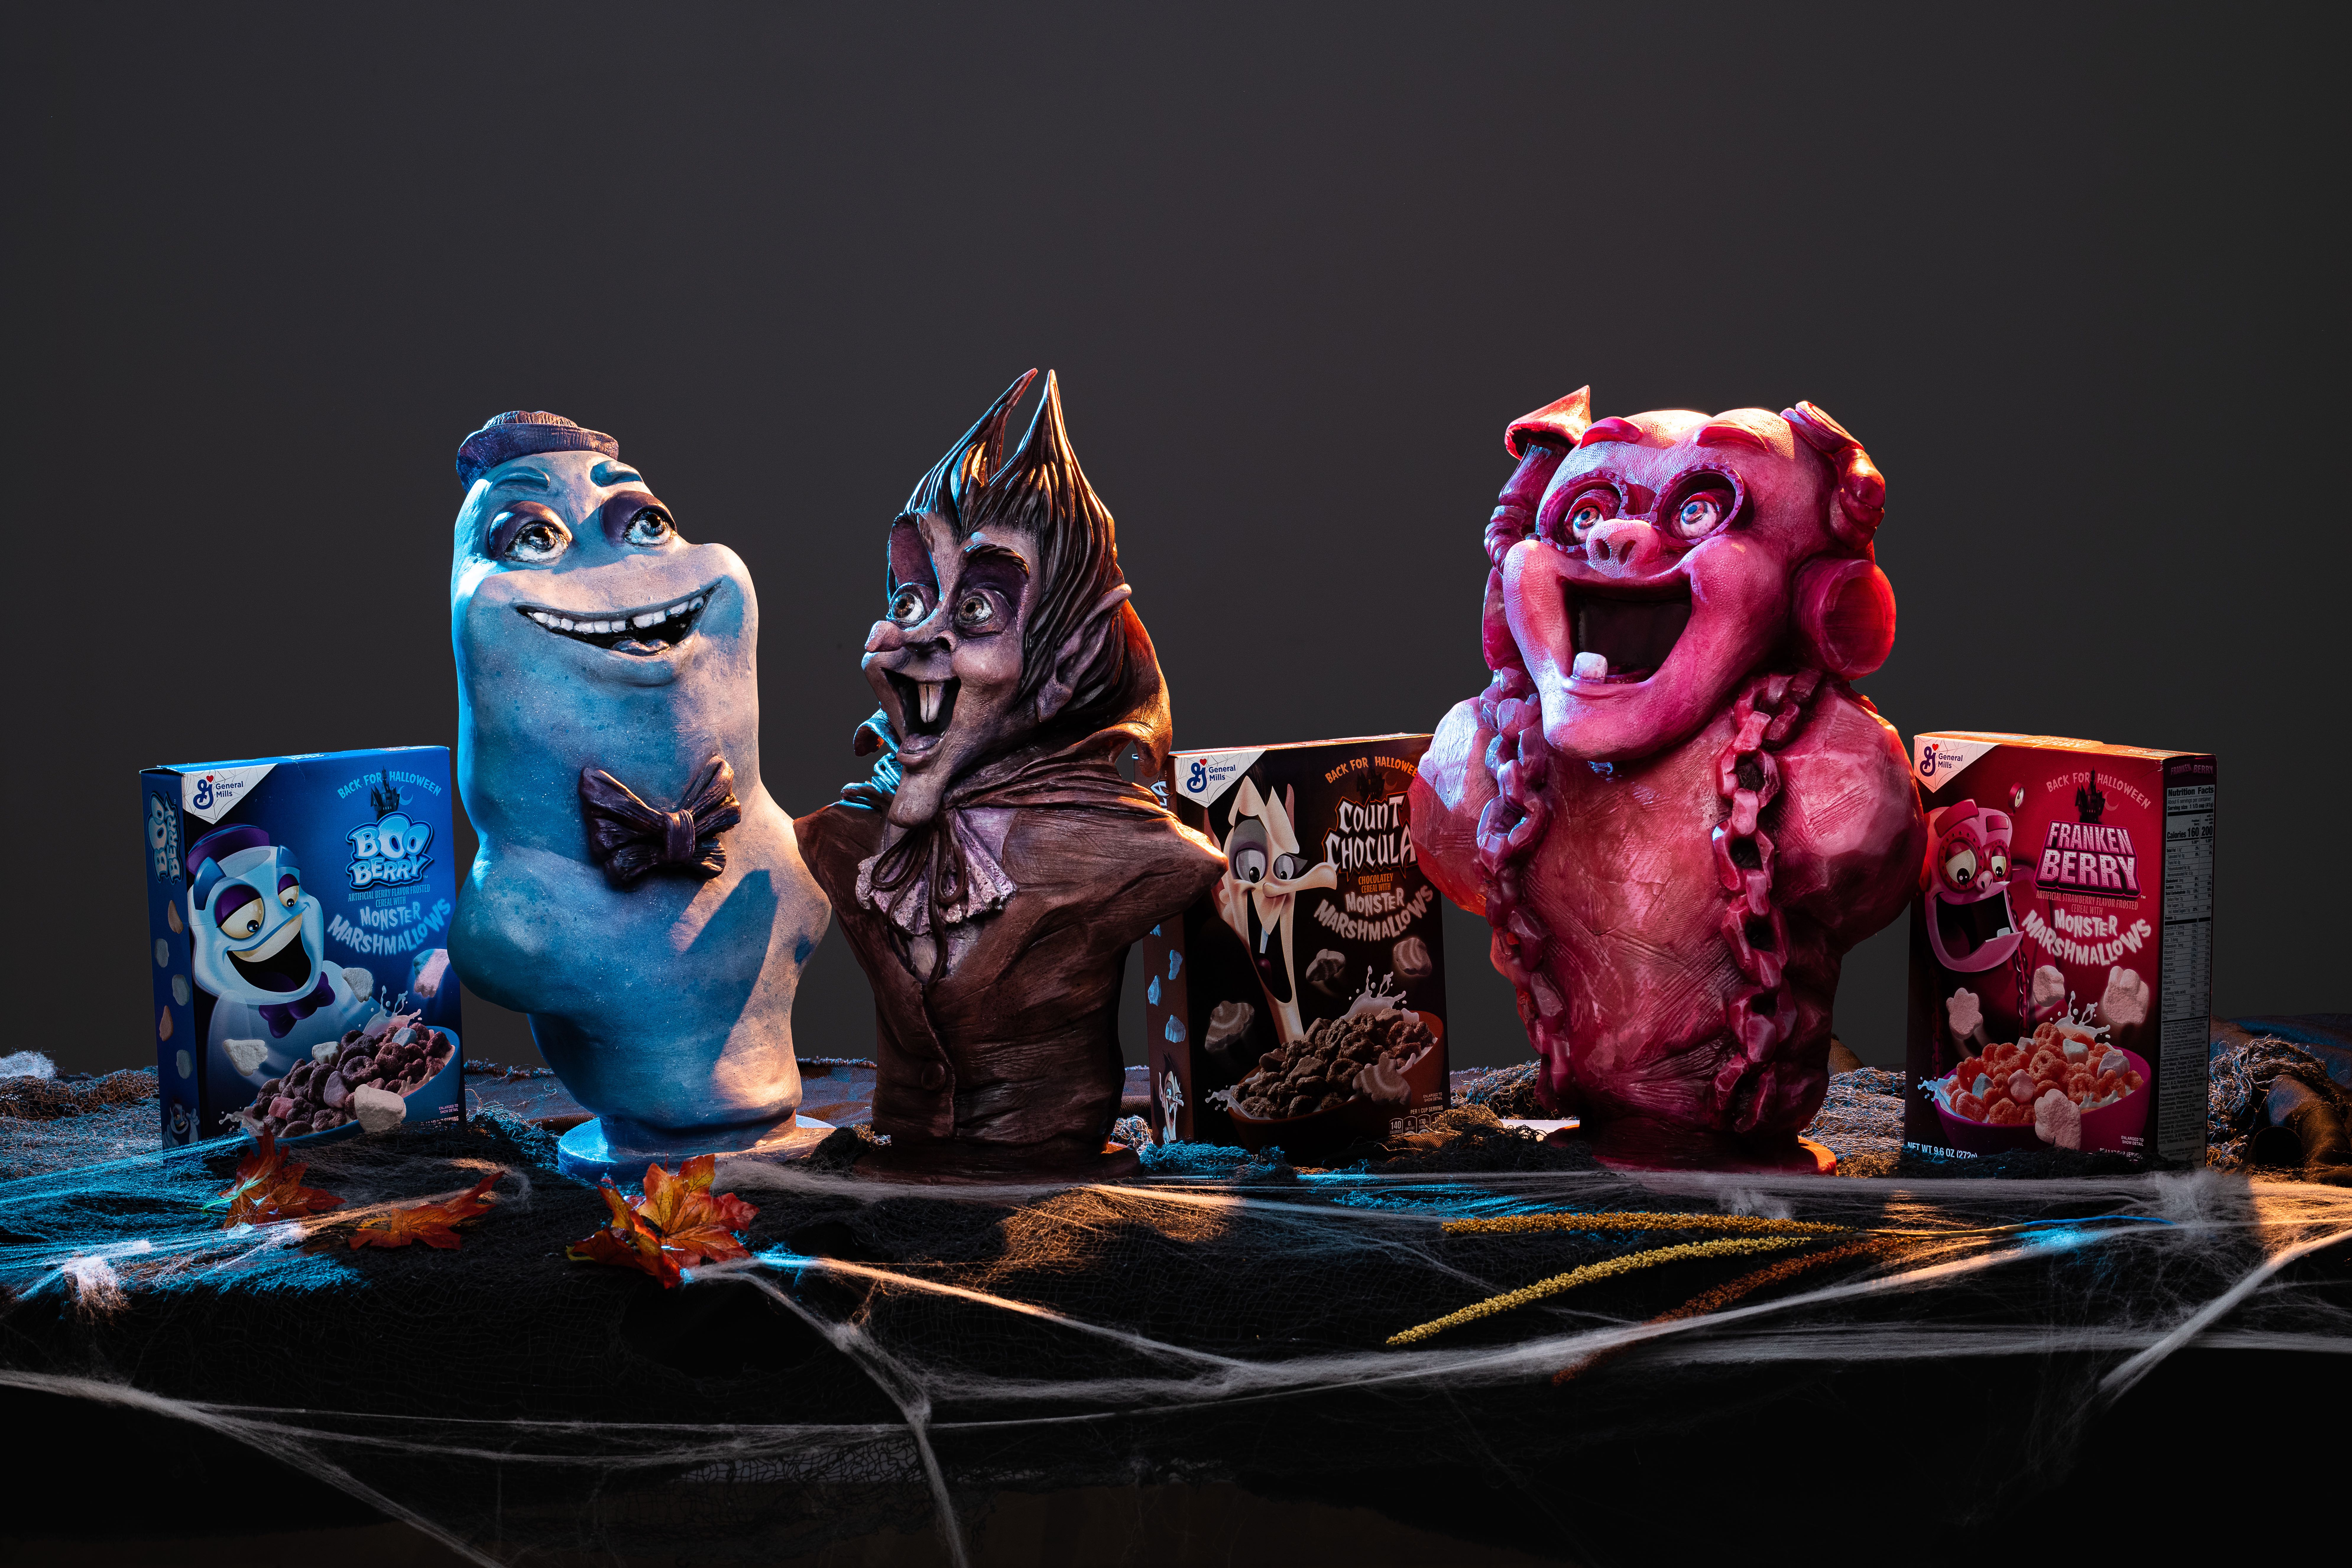 Monster Cereal busts with their cereal boxes